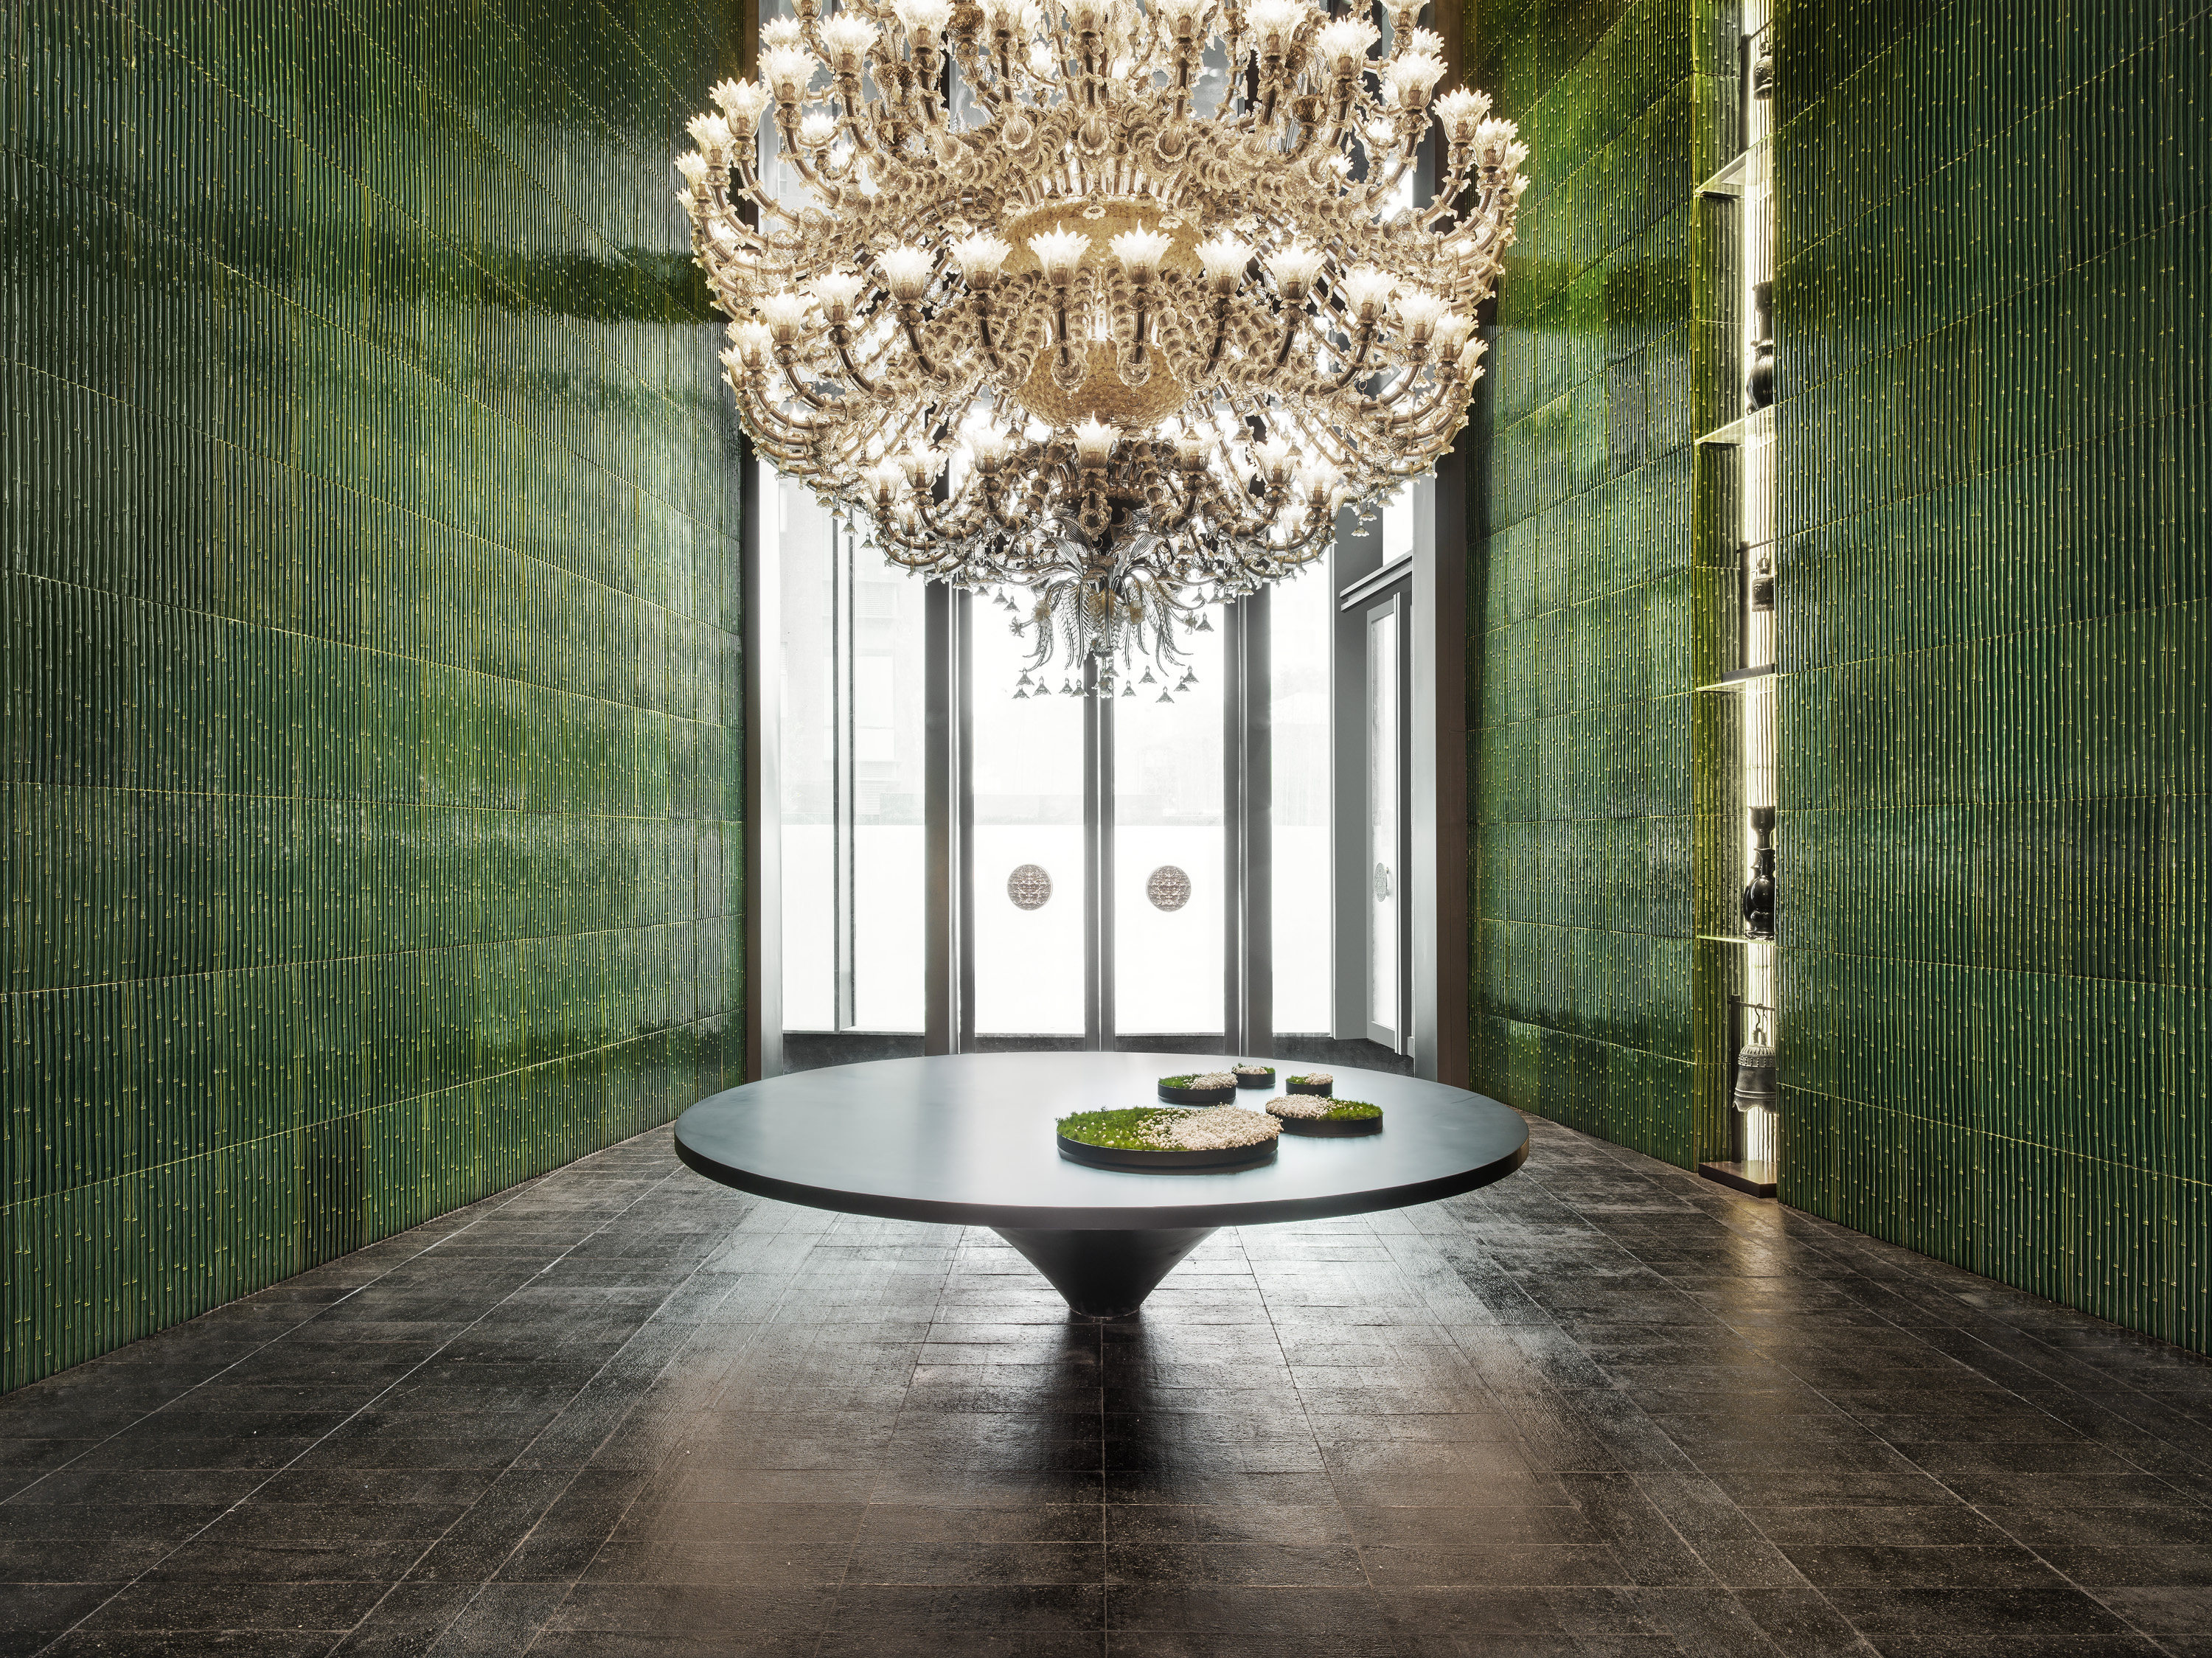 A Murano-glass chandelier greets guests at The Middle House in Shanghai. Photos: Handout